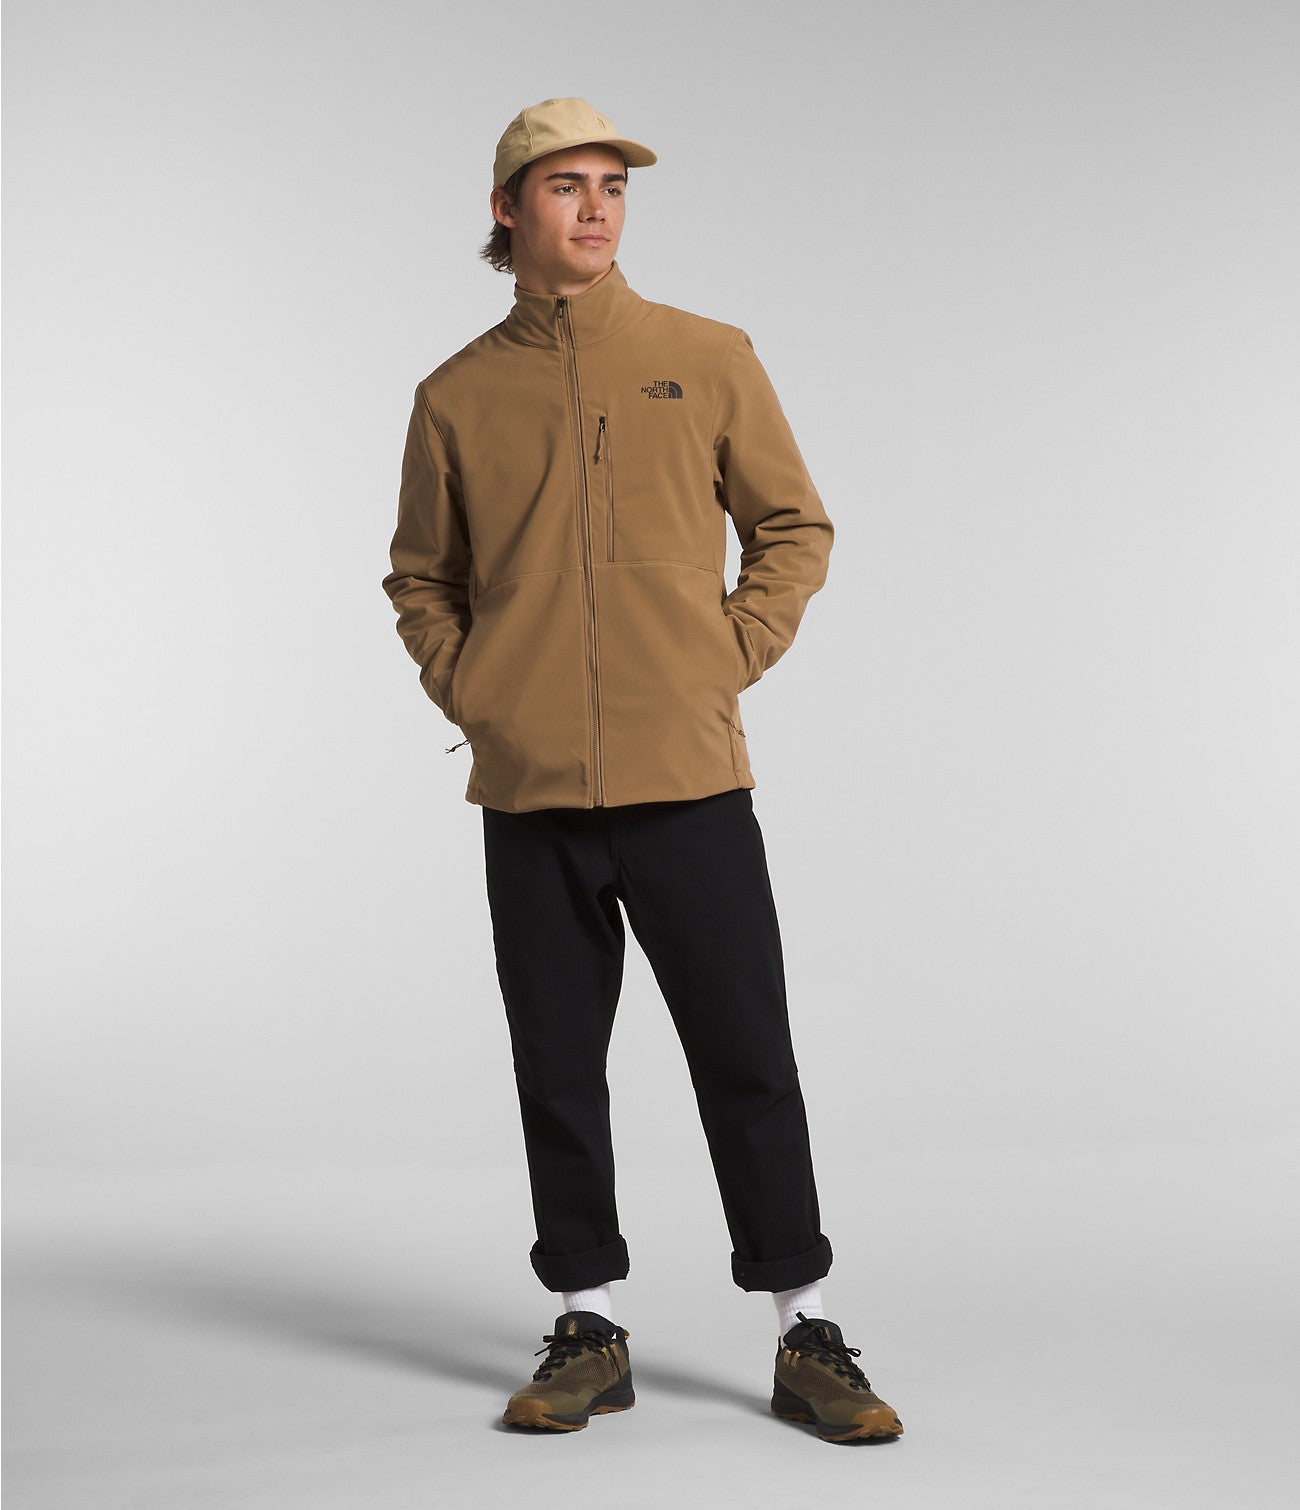 THE NORTH FACE Men's Jackets North Face Men’s Apex Bionic 3 Jacket || David's Clothing